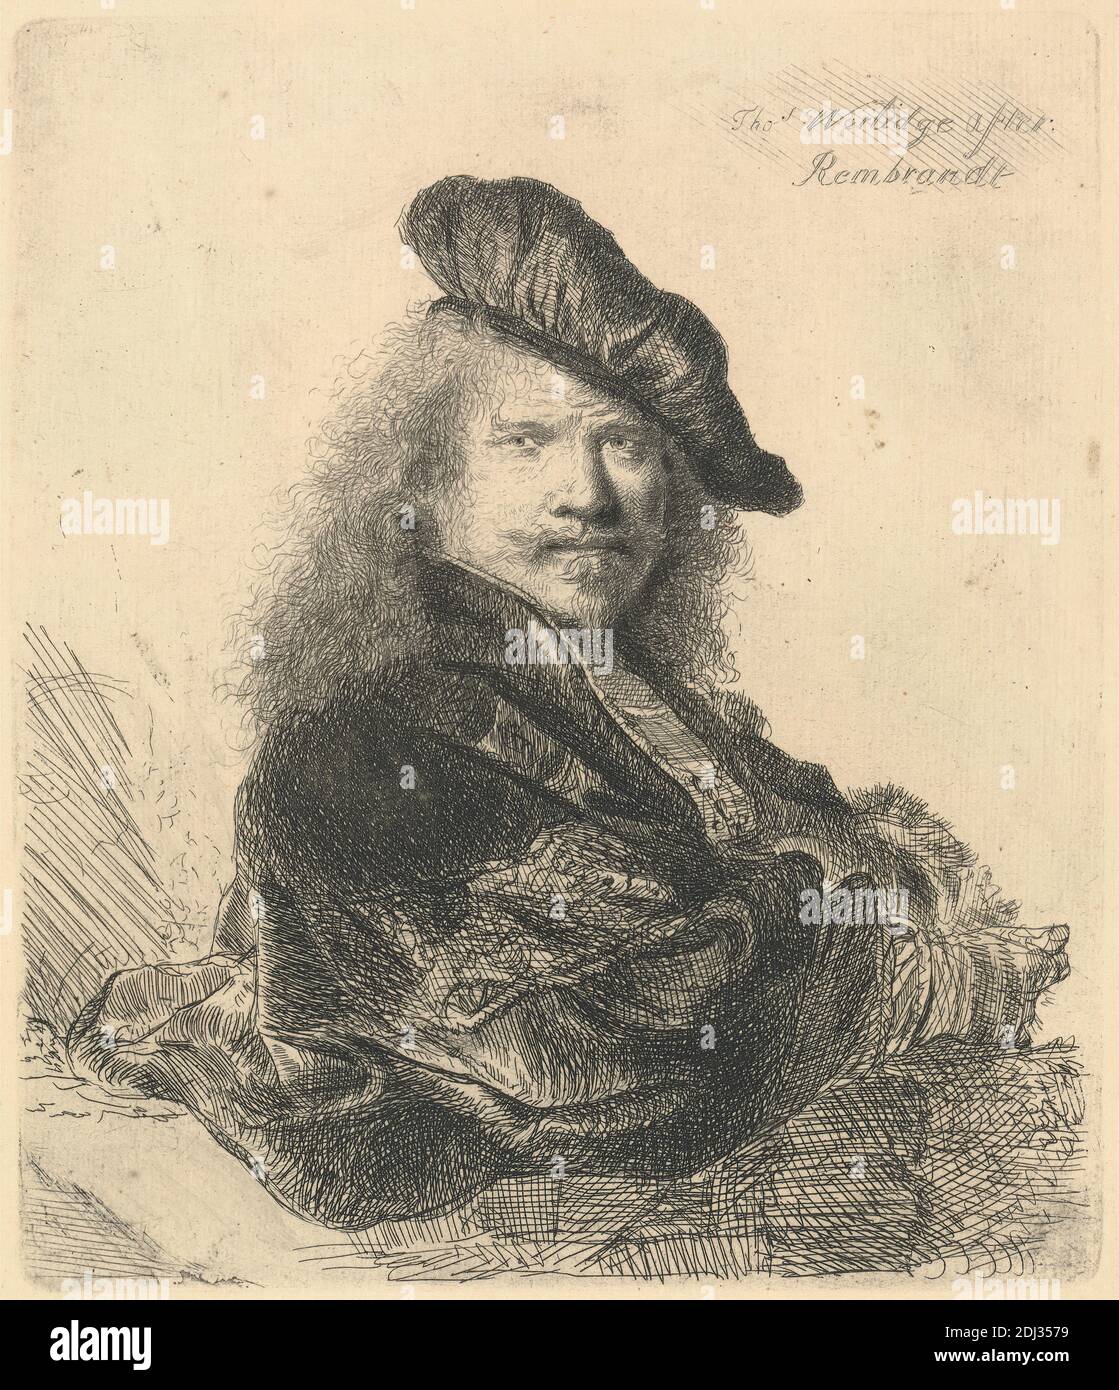 Copy of Rembrandt Self-Portrait, Print made by Thomas Worlidge, 1700–1766, British, after Rembrandt van Rijn, 1606–1669, Dutch, ca. 1757, Etching on laid paper, Plate: 6 1/4 x 5 1/4in. (15.9 x 13.3cm) and Sheet: 8 7/8 x 7in. (22.5 x 17.8cm), portrait Stock Photo